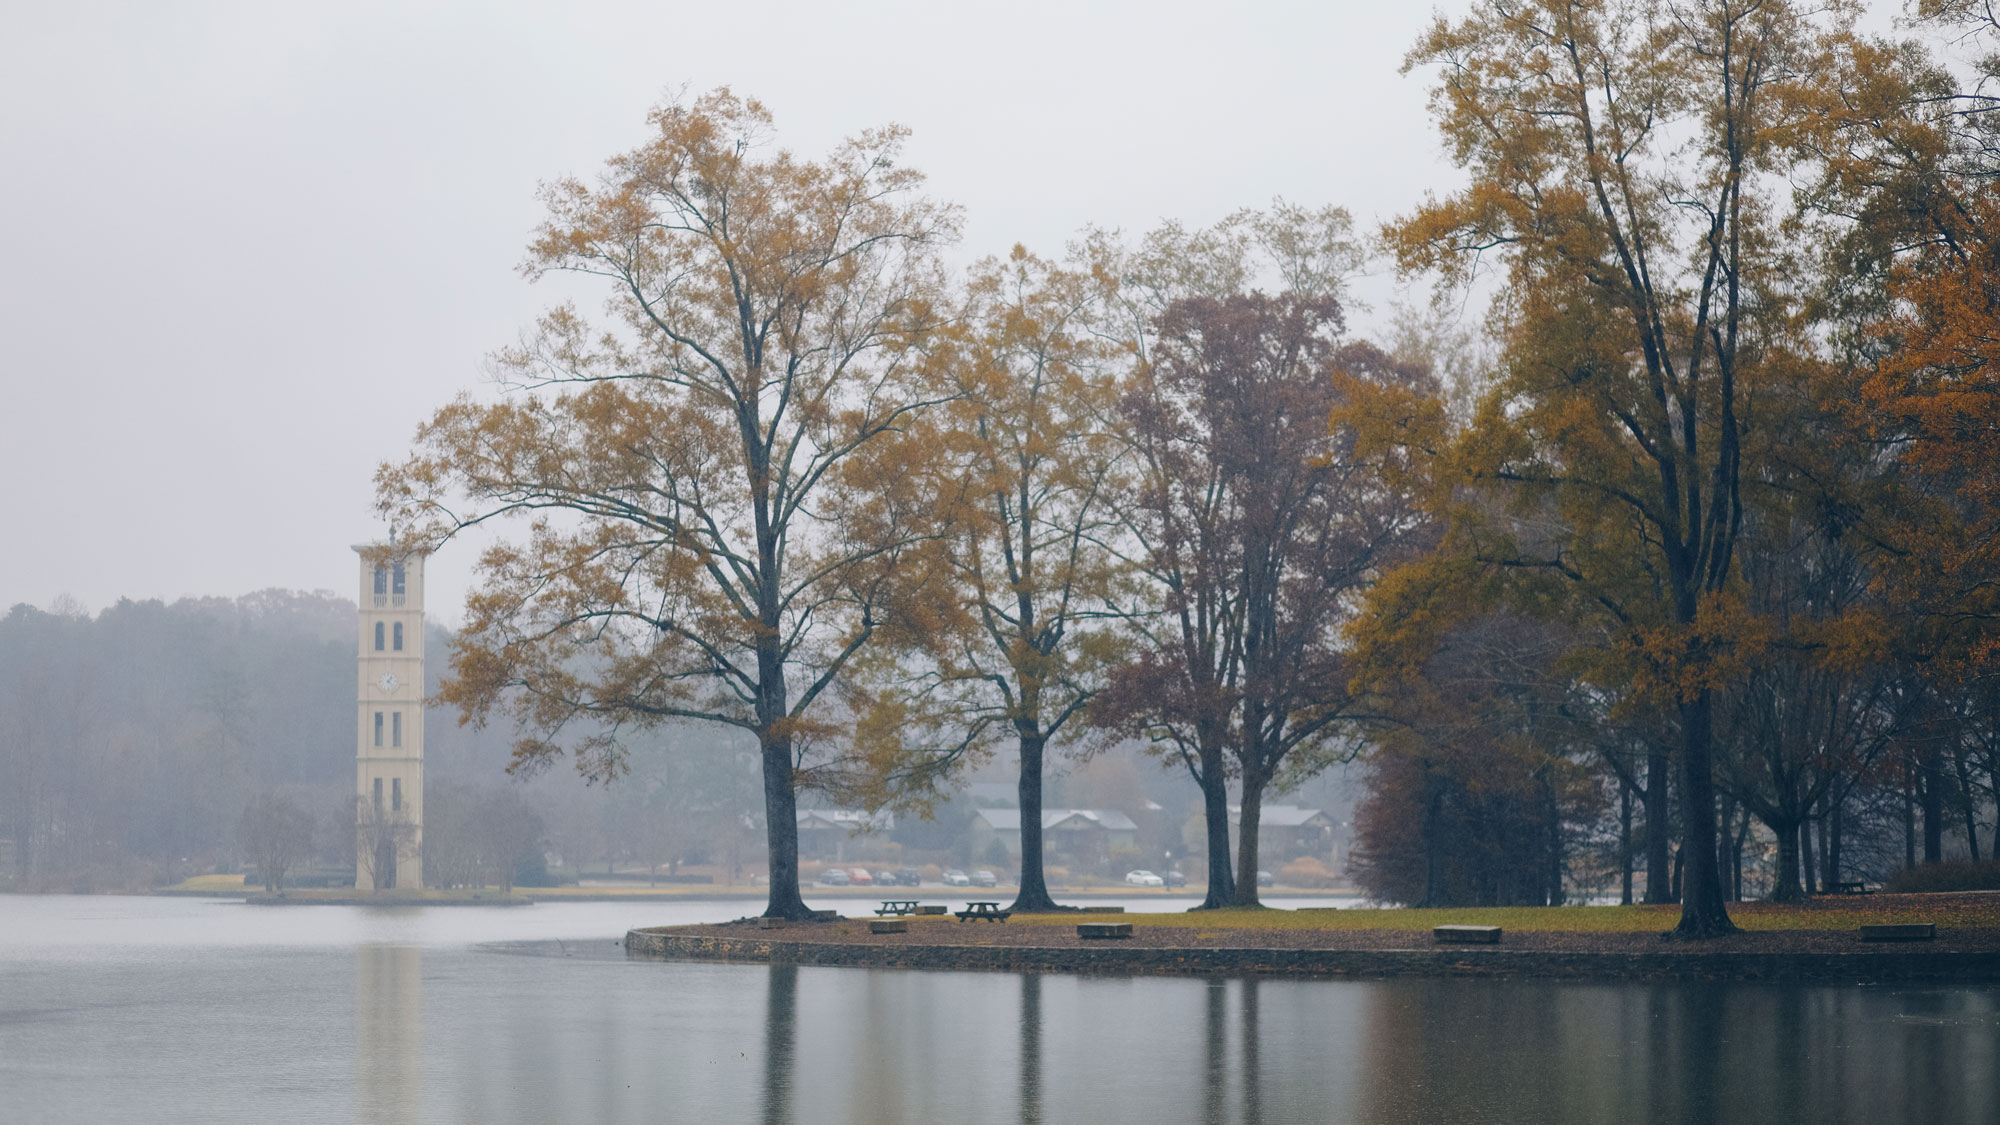 Furman bell tower from afar, fog and mist on the lake